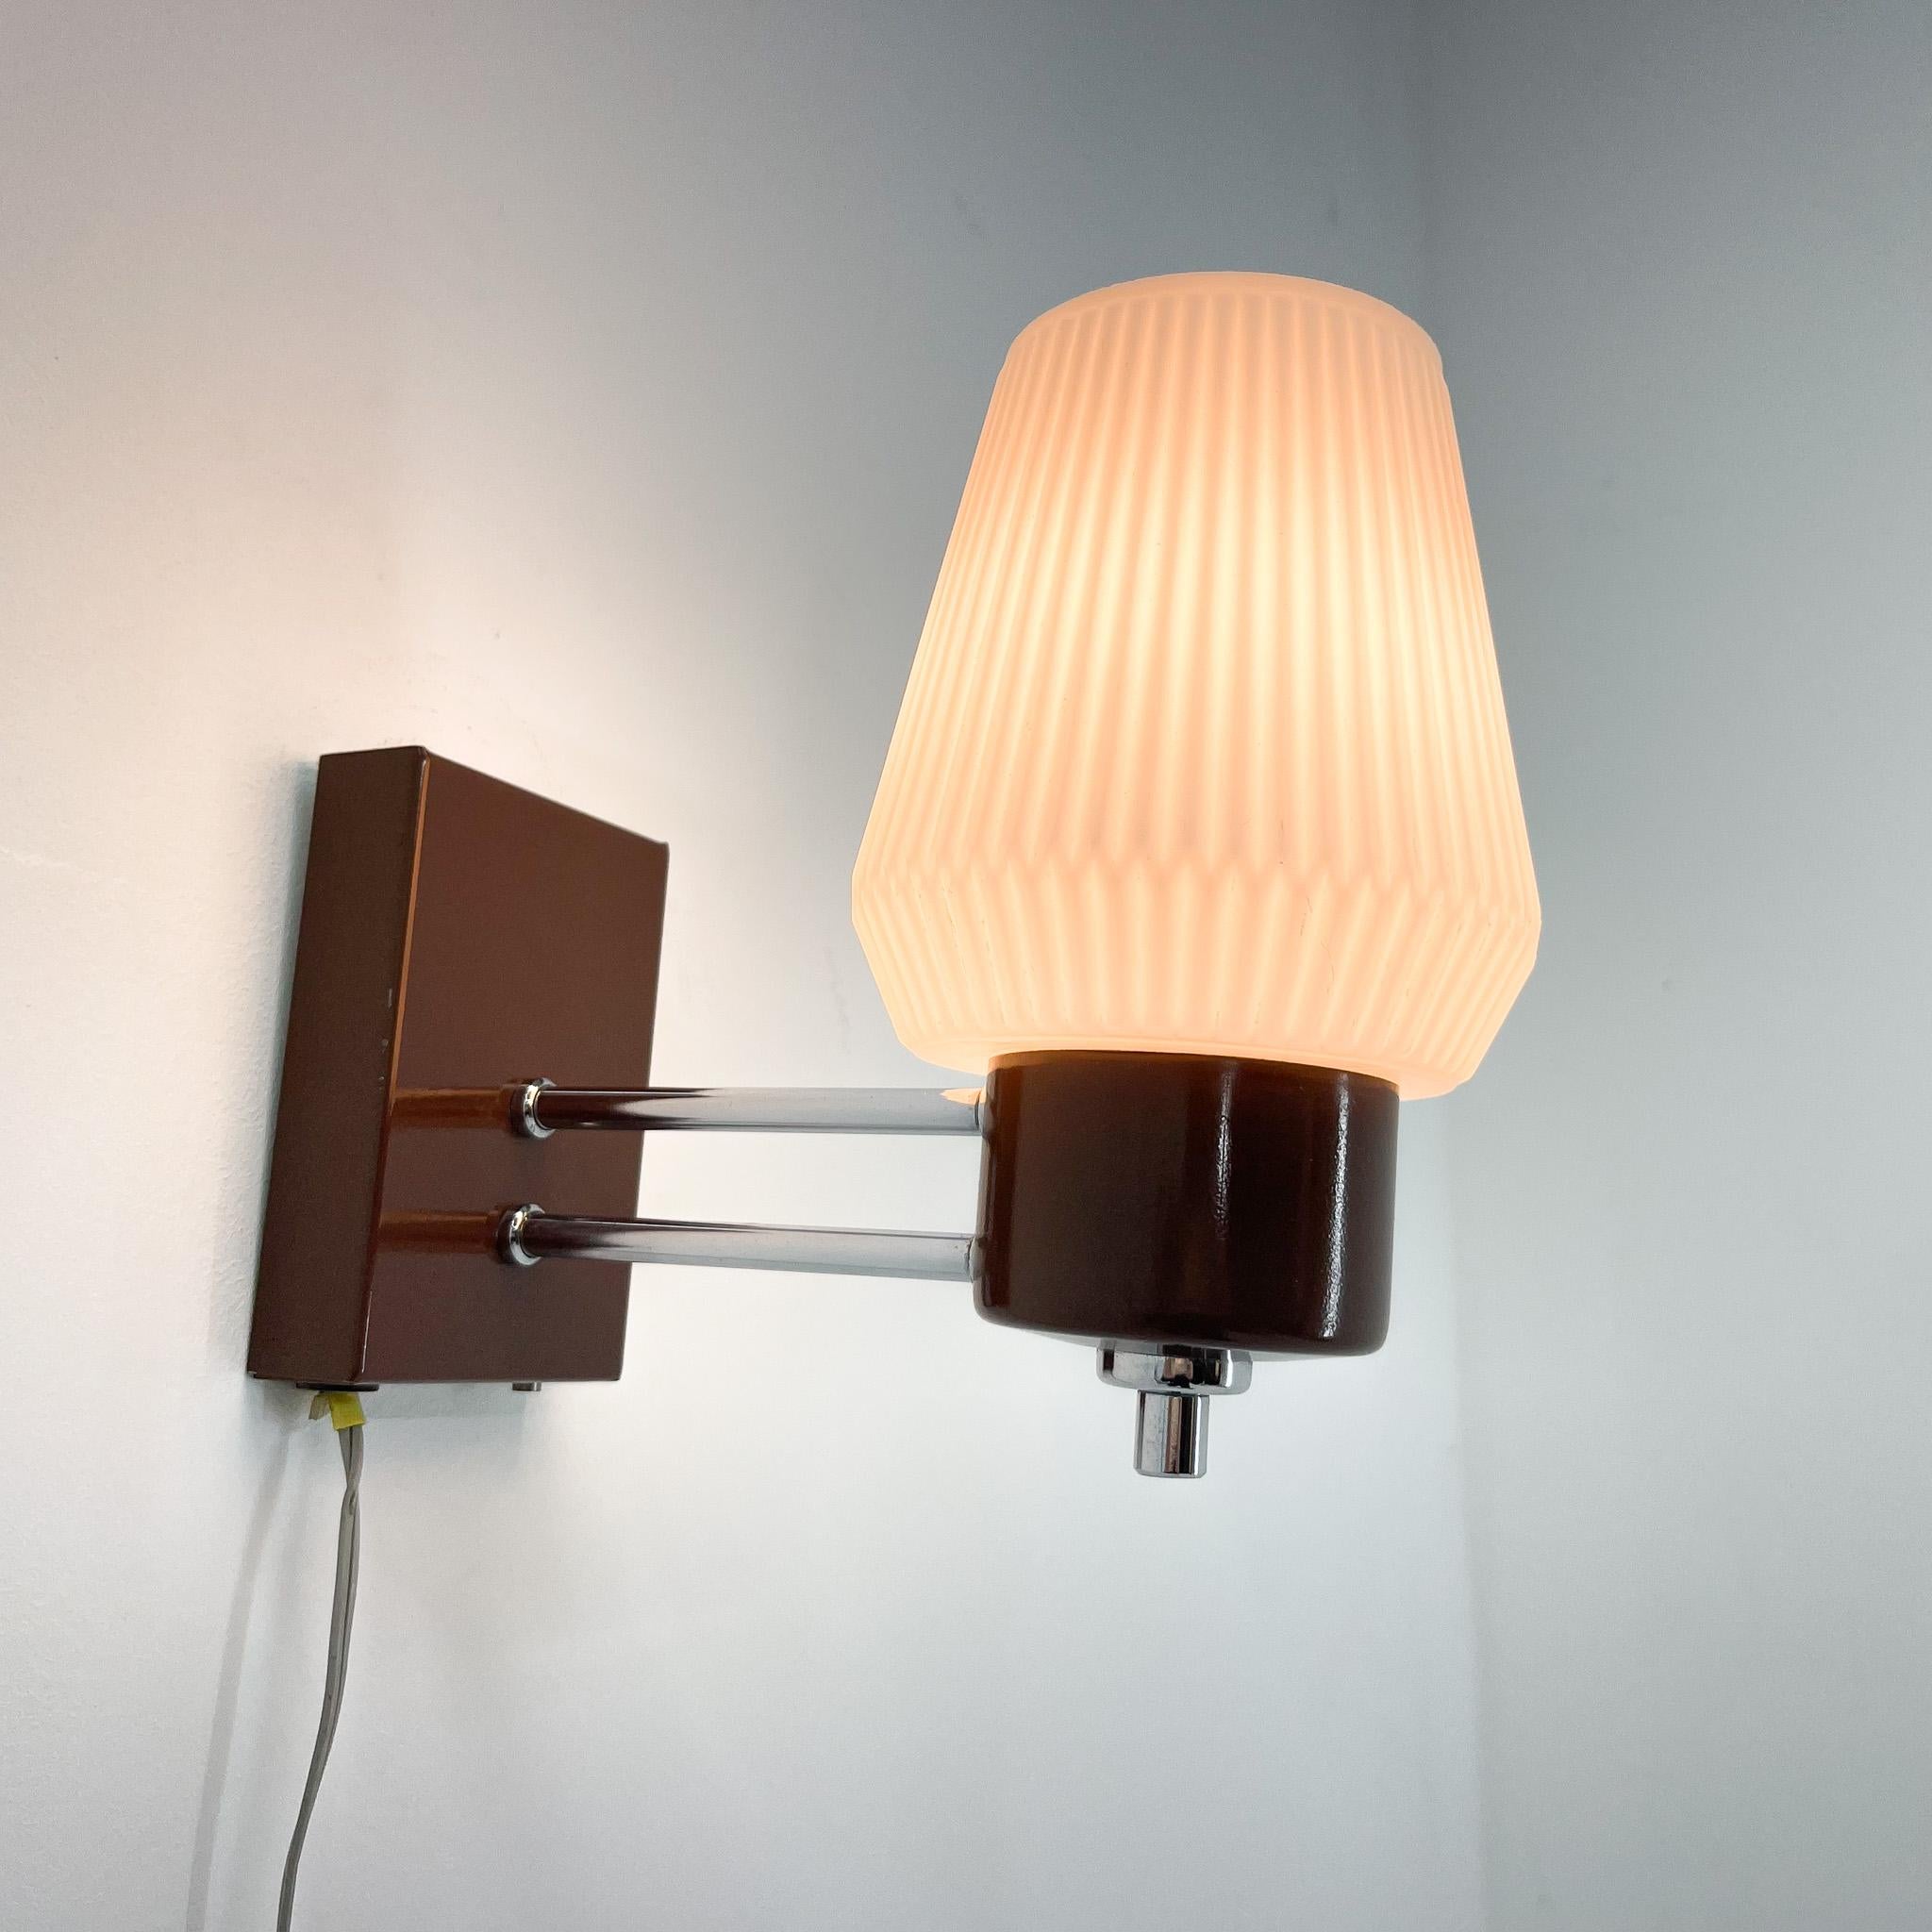 1970s Wall Lamp by Lidokov, Czechoslovakia In Good Condition For Sale In Praha, CZ